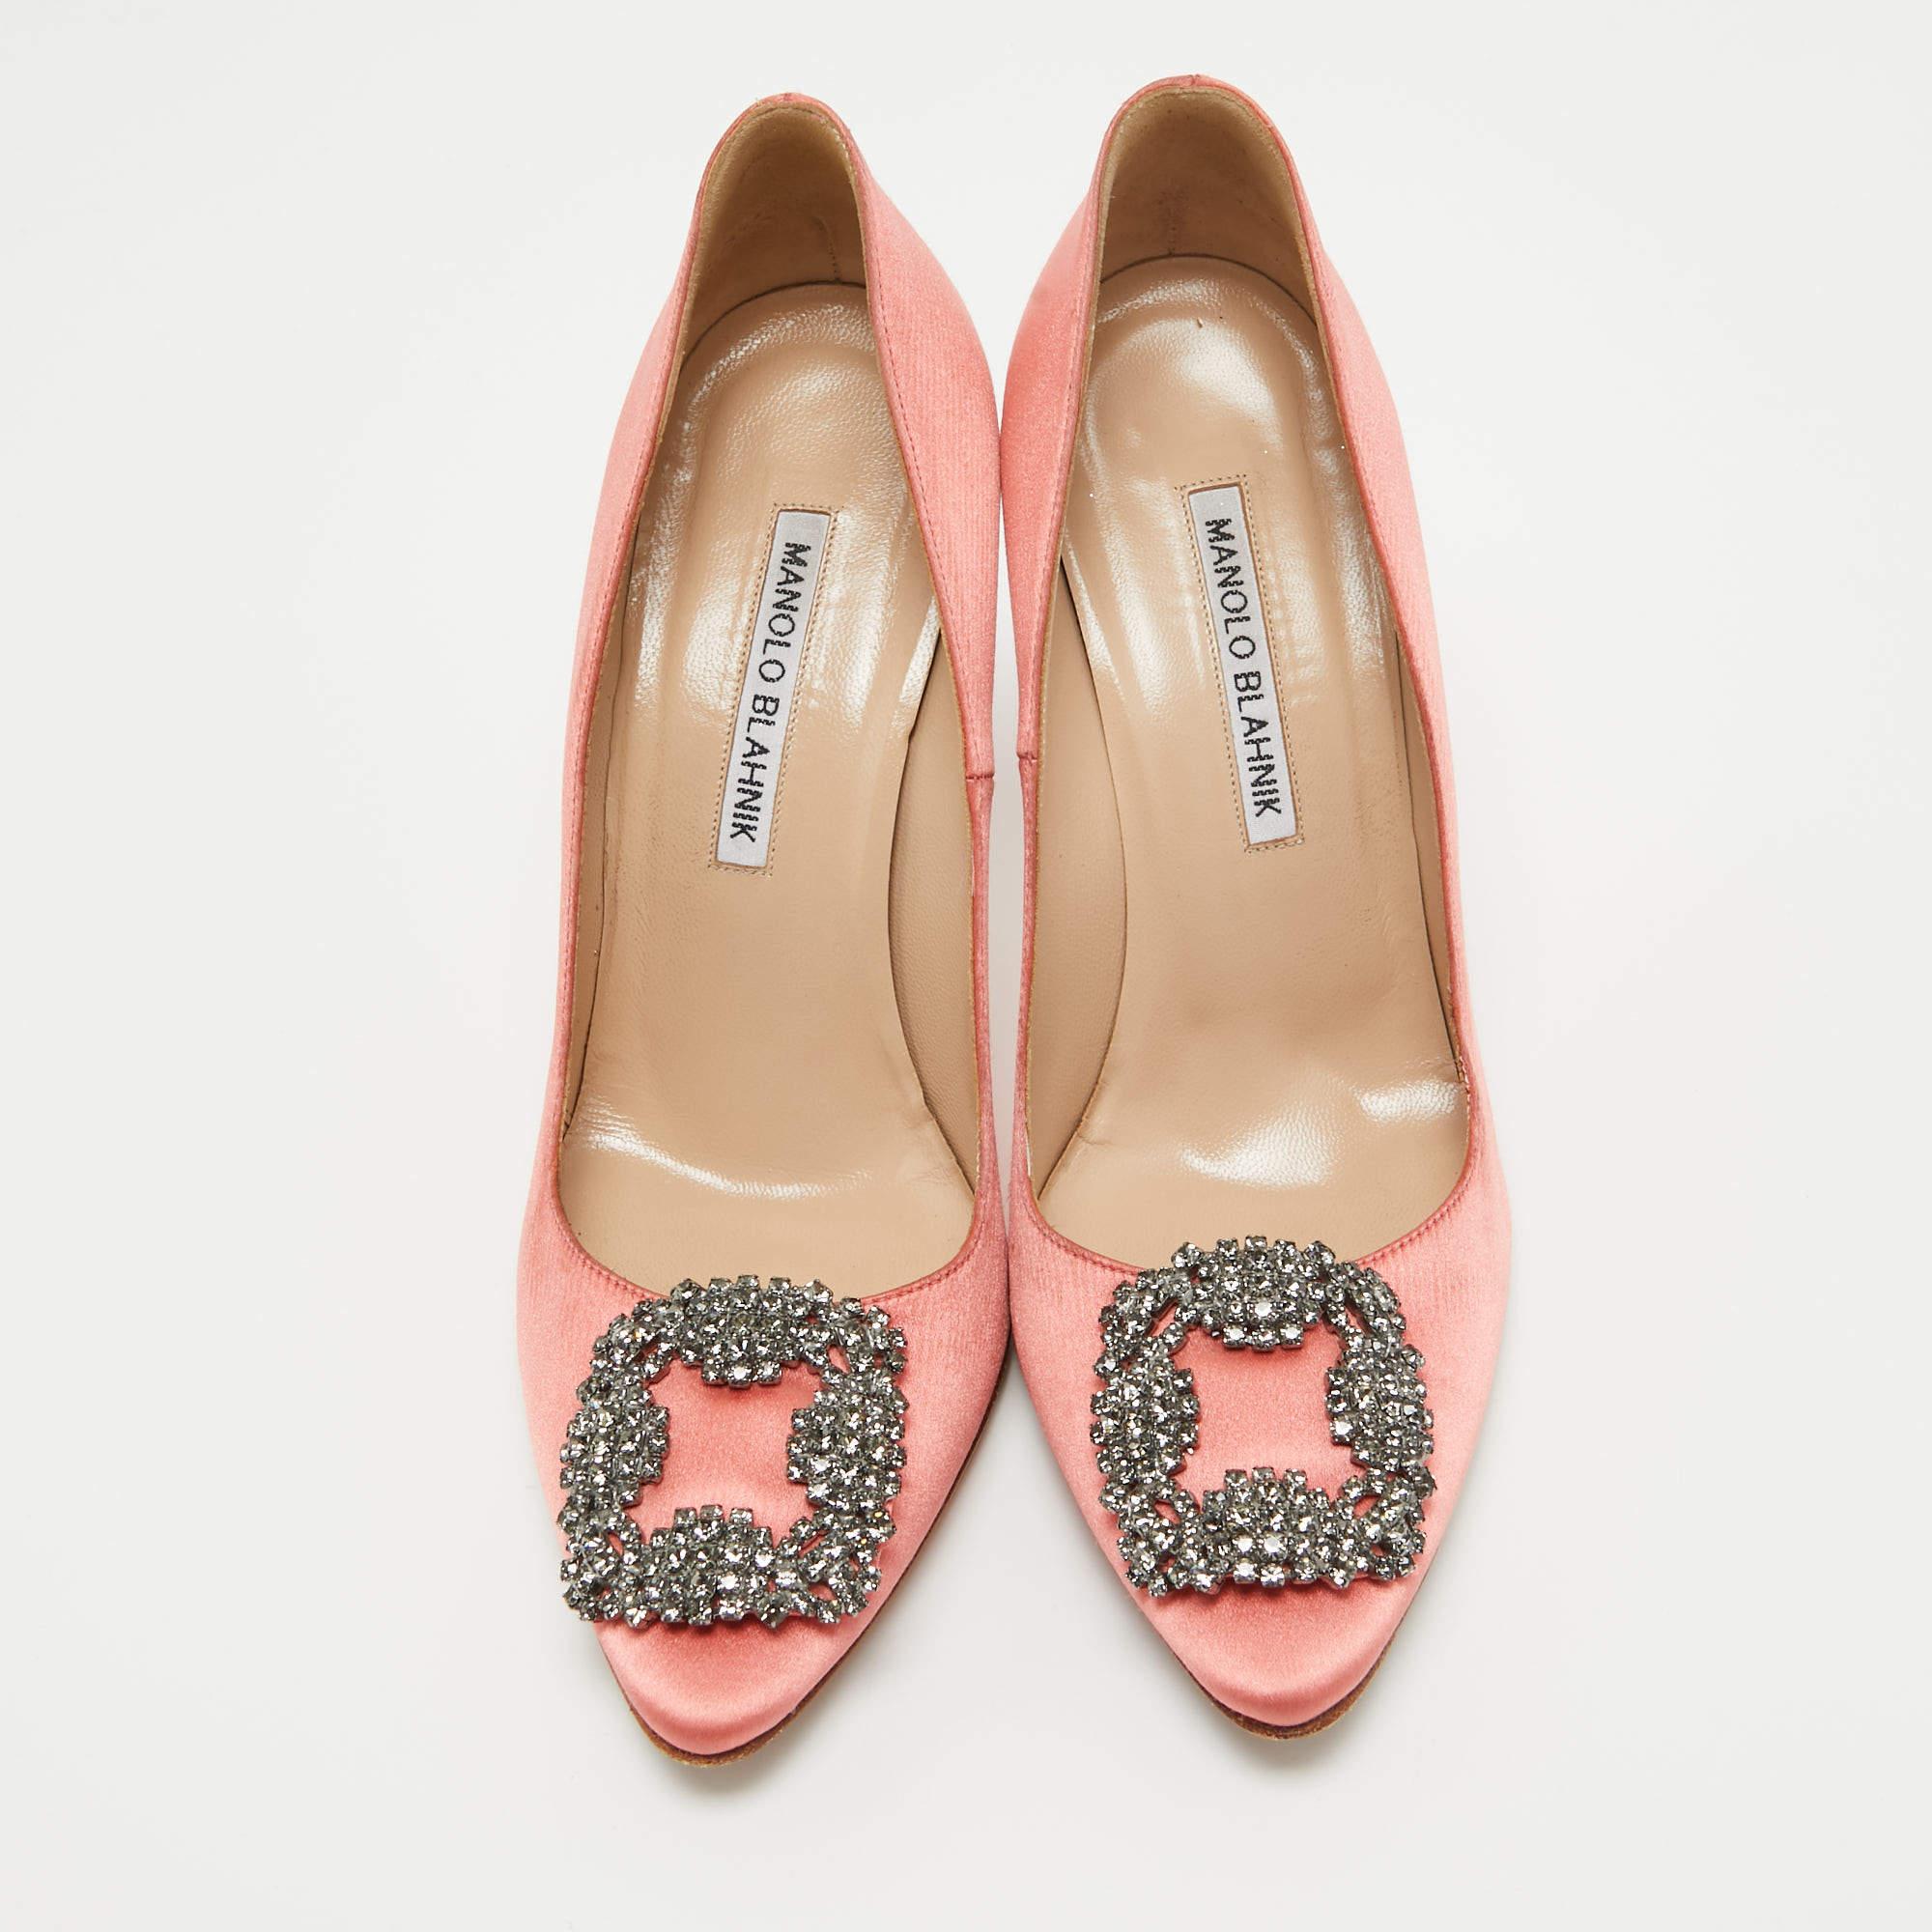 Manolo Blahnik is well-known for designs that embody opulence, femininity, and elegance. Carrying the same traits, these Hangisi pumps come crafted from satin into a covered-toe silhouette augmented by the embellishments perched on the uppers. They